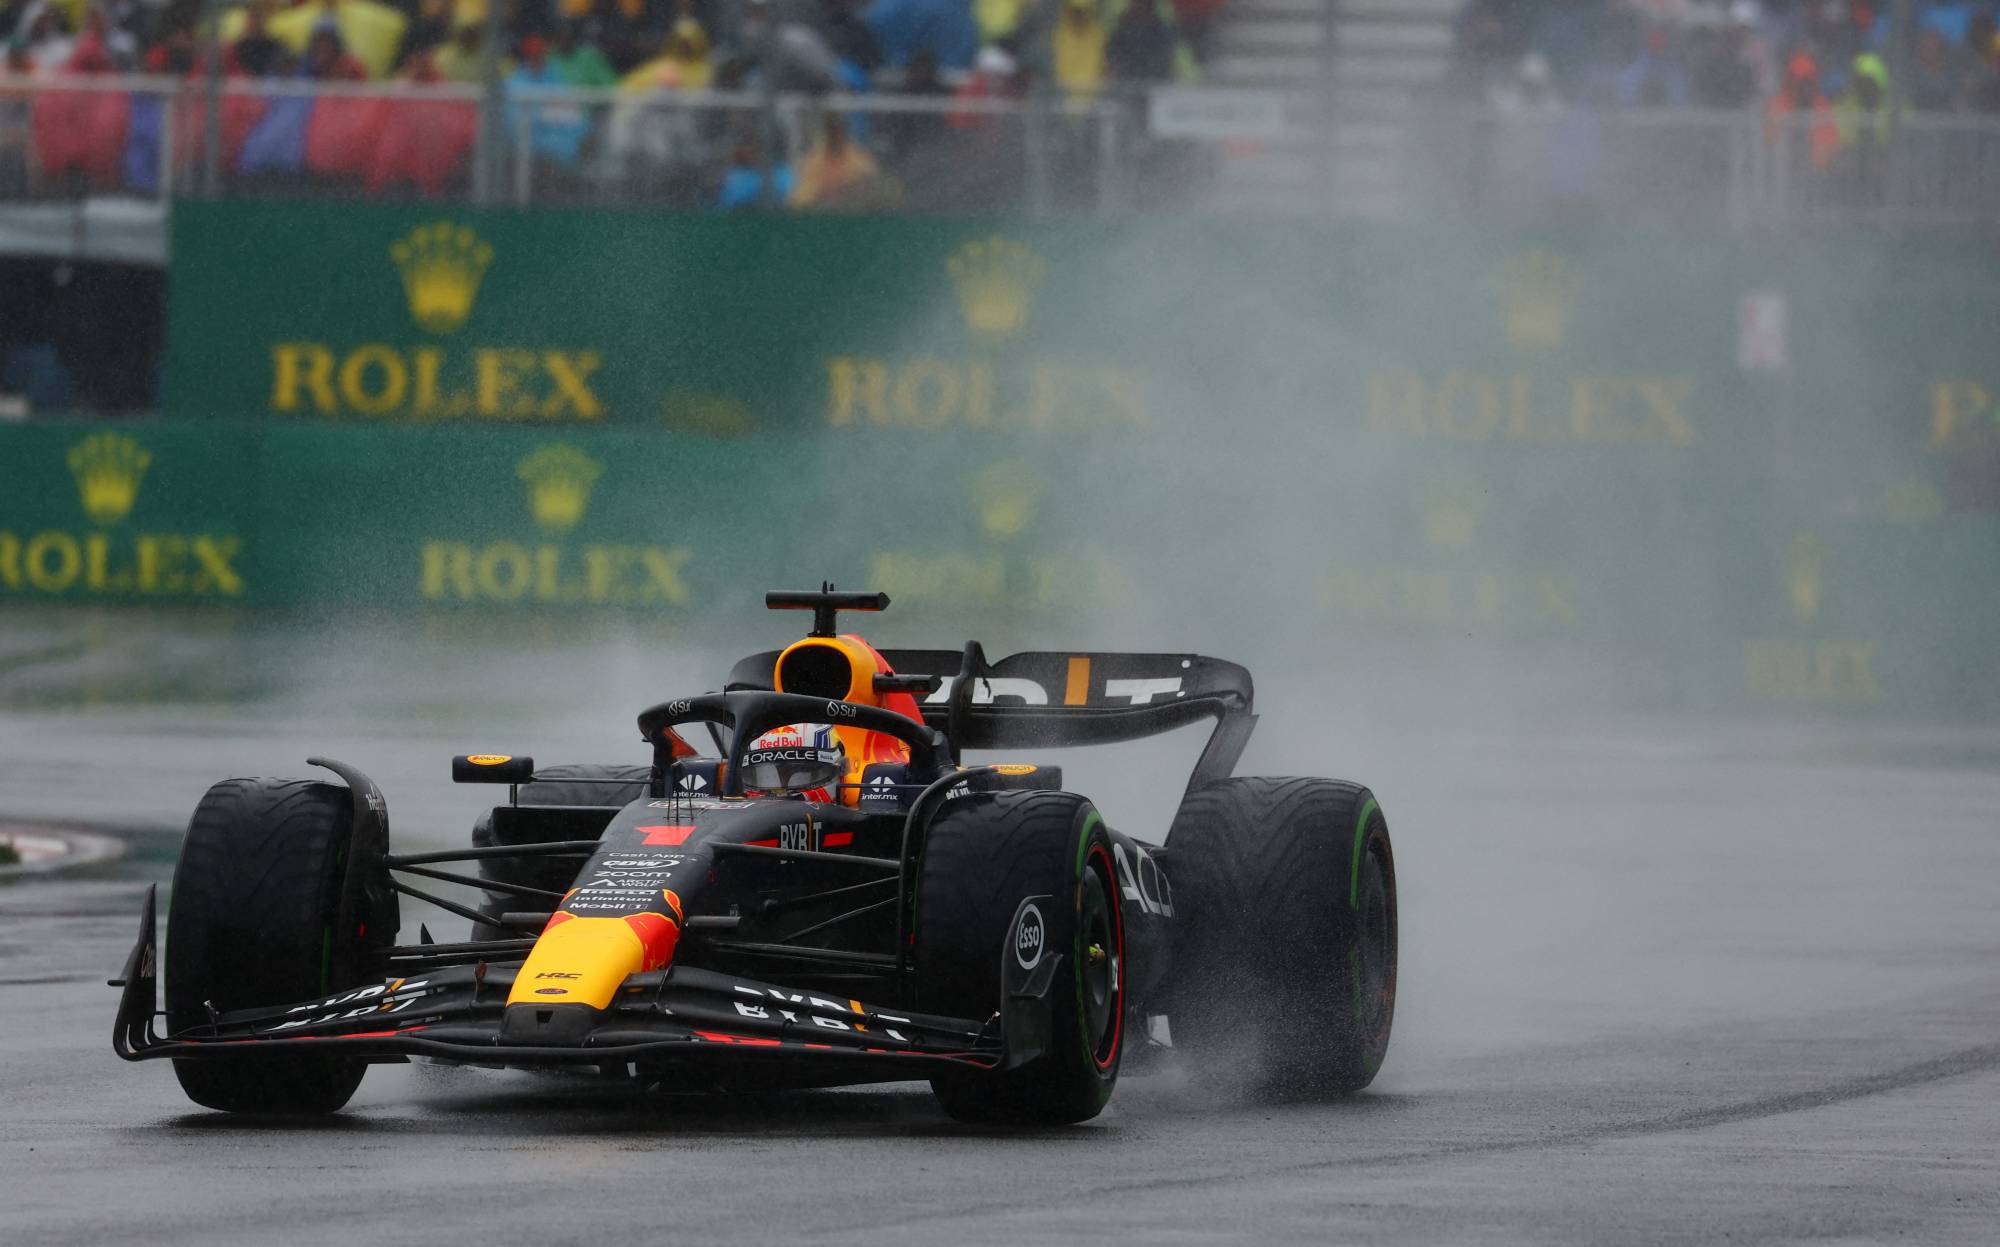 Max Verstappen on pole after wild Canadian GP qualifying - The